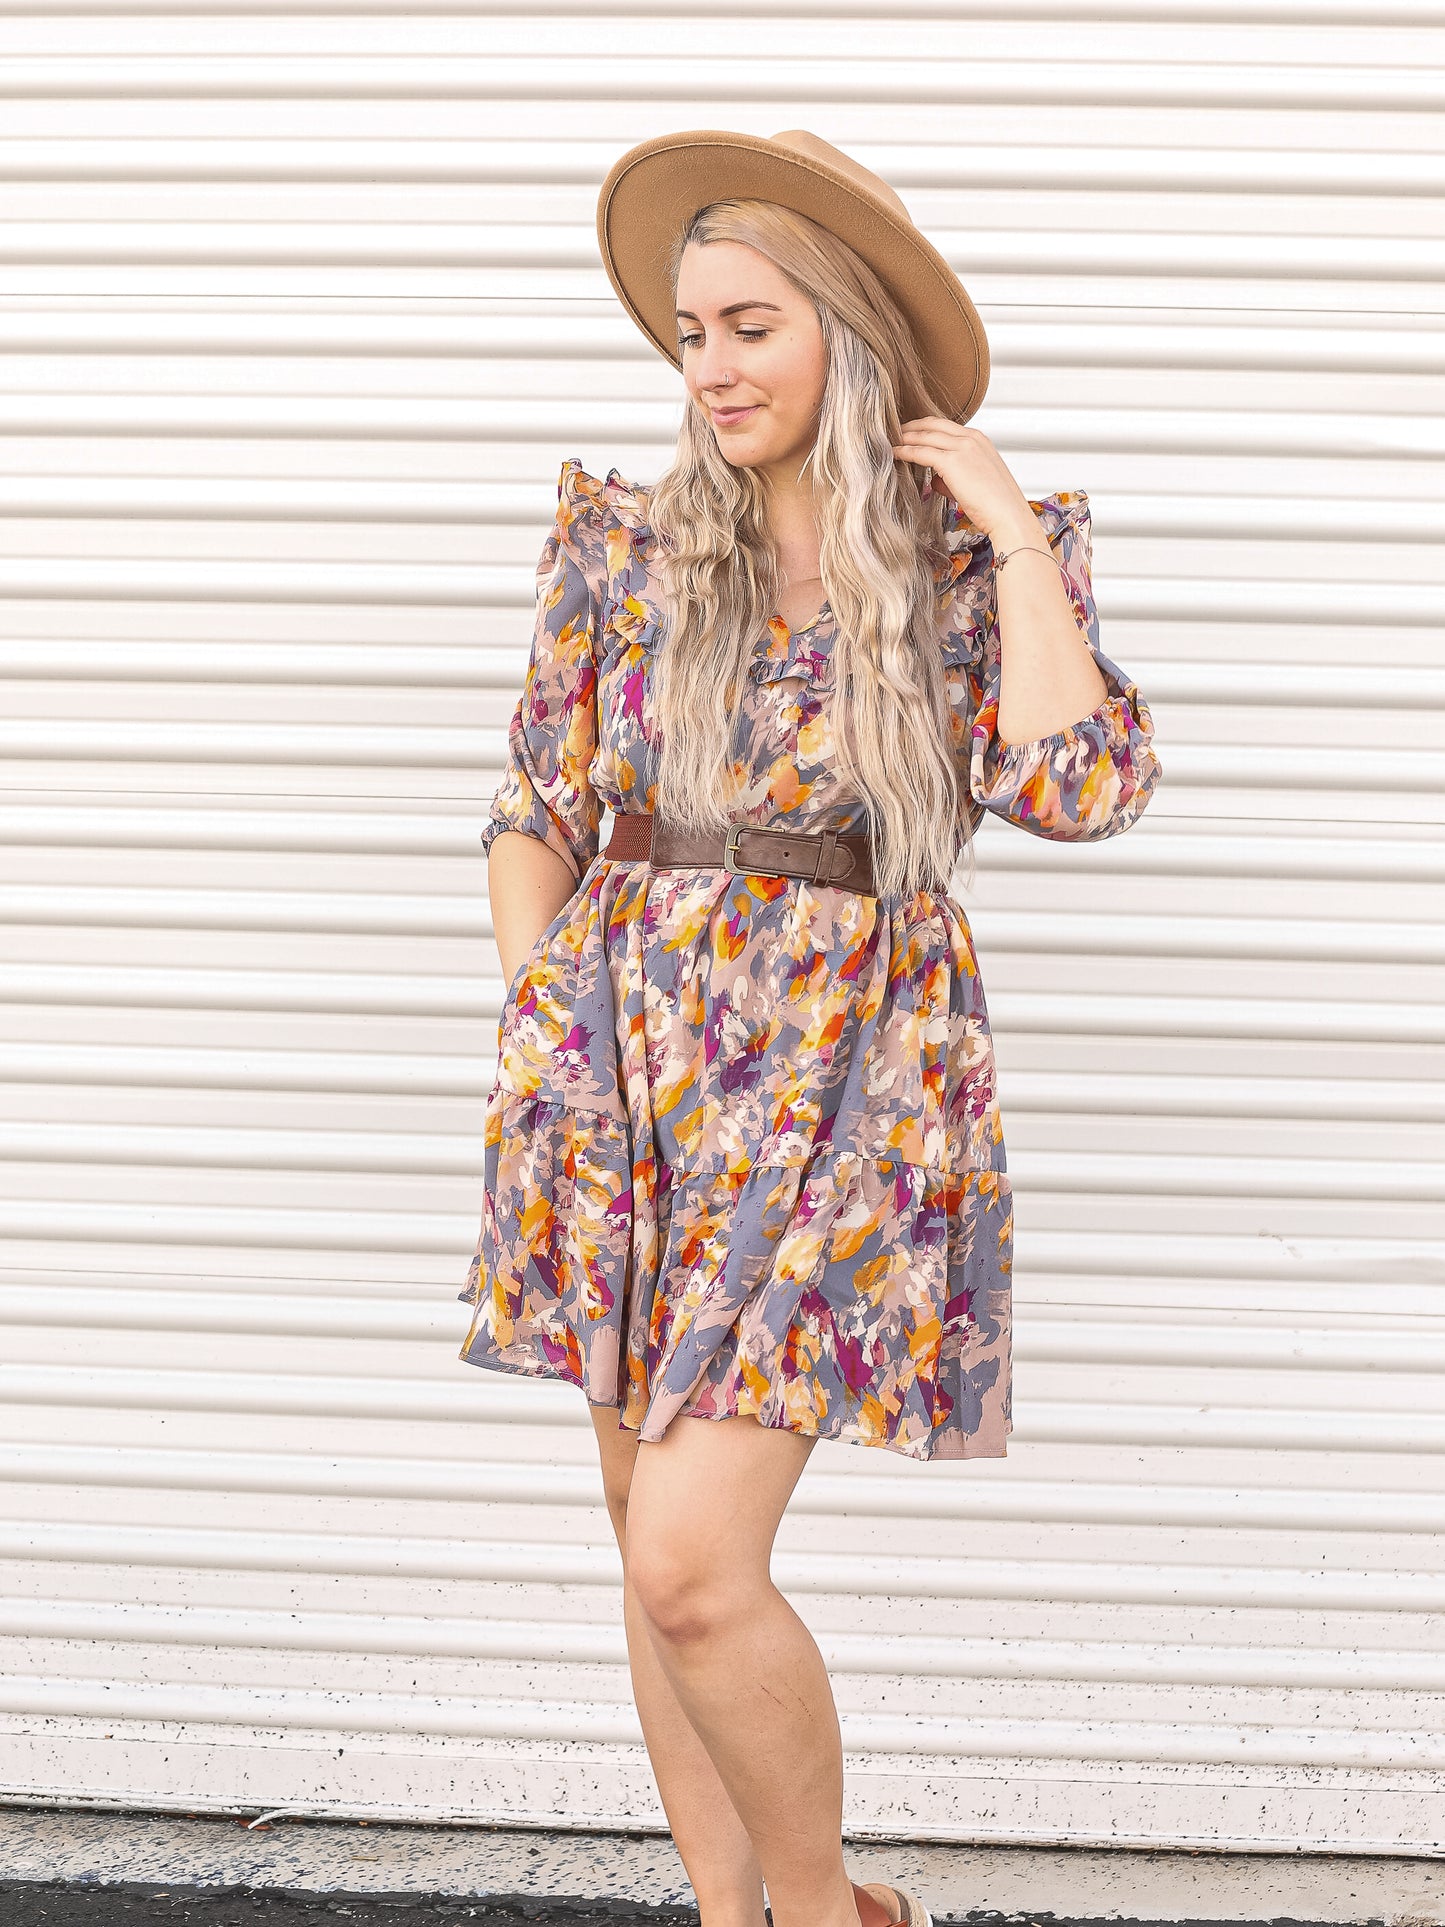 Multicolored dress styled with a belt and a wide hat.